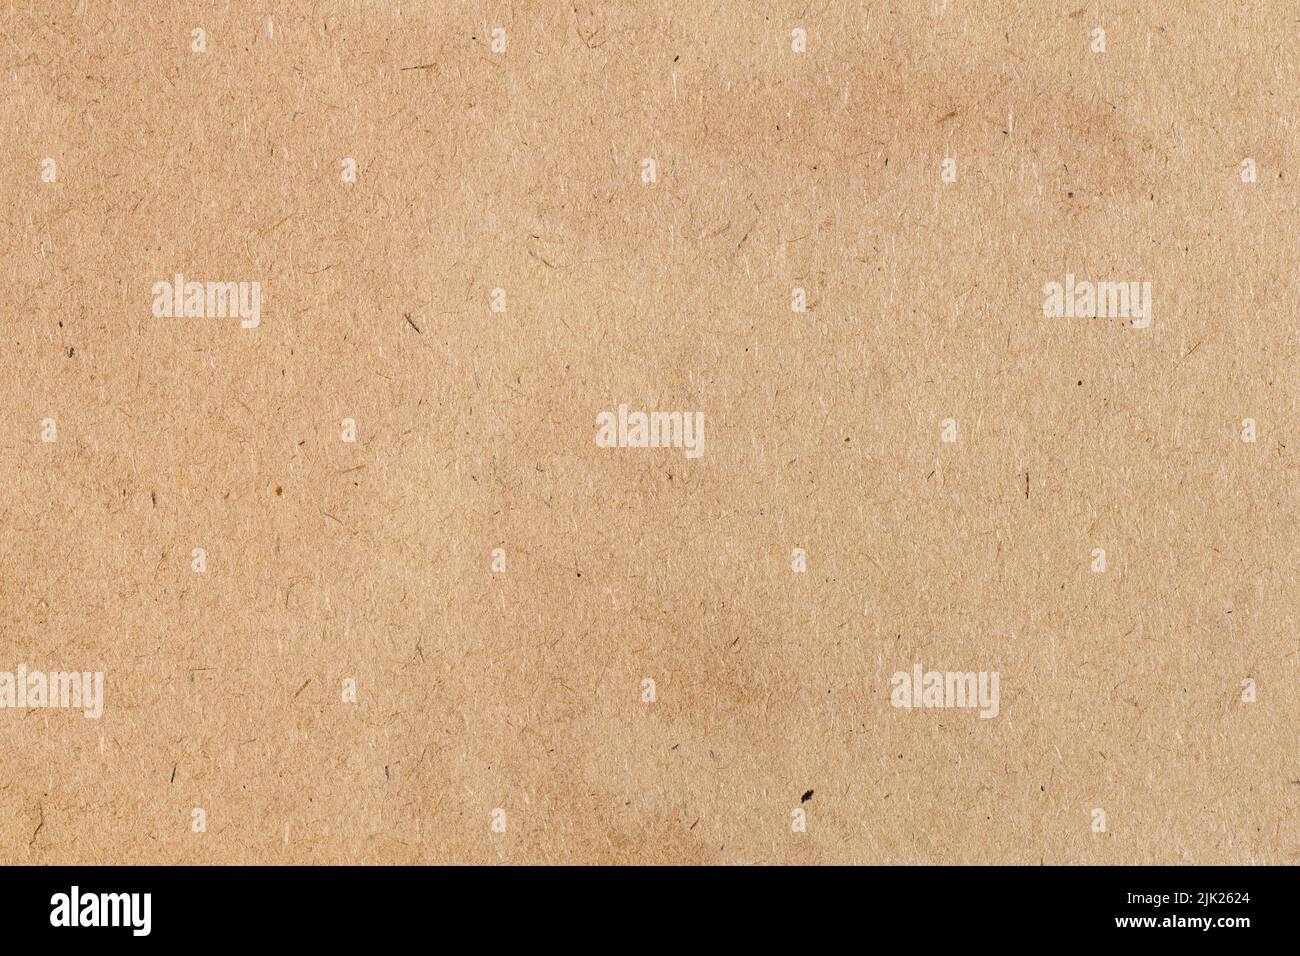 paper background - surface of vintage shabby brown cardboard close up Stock Photo